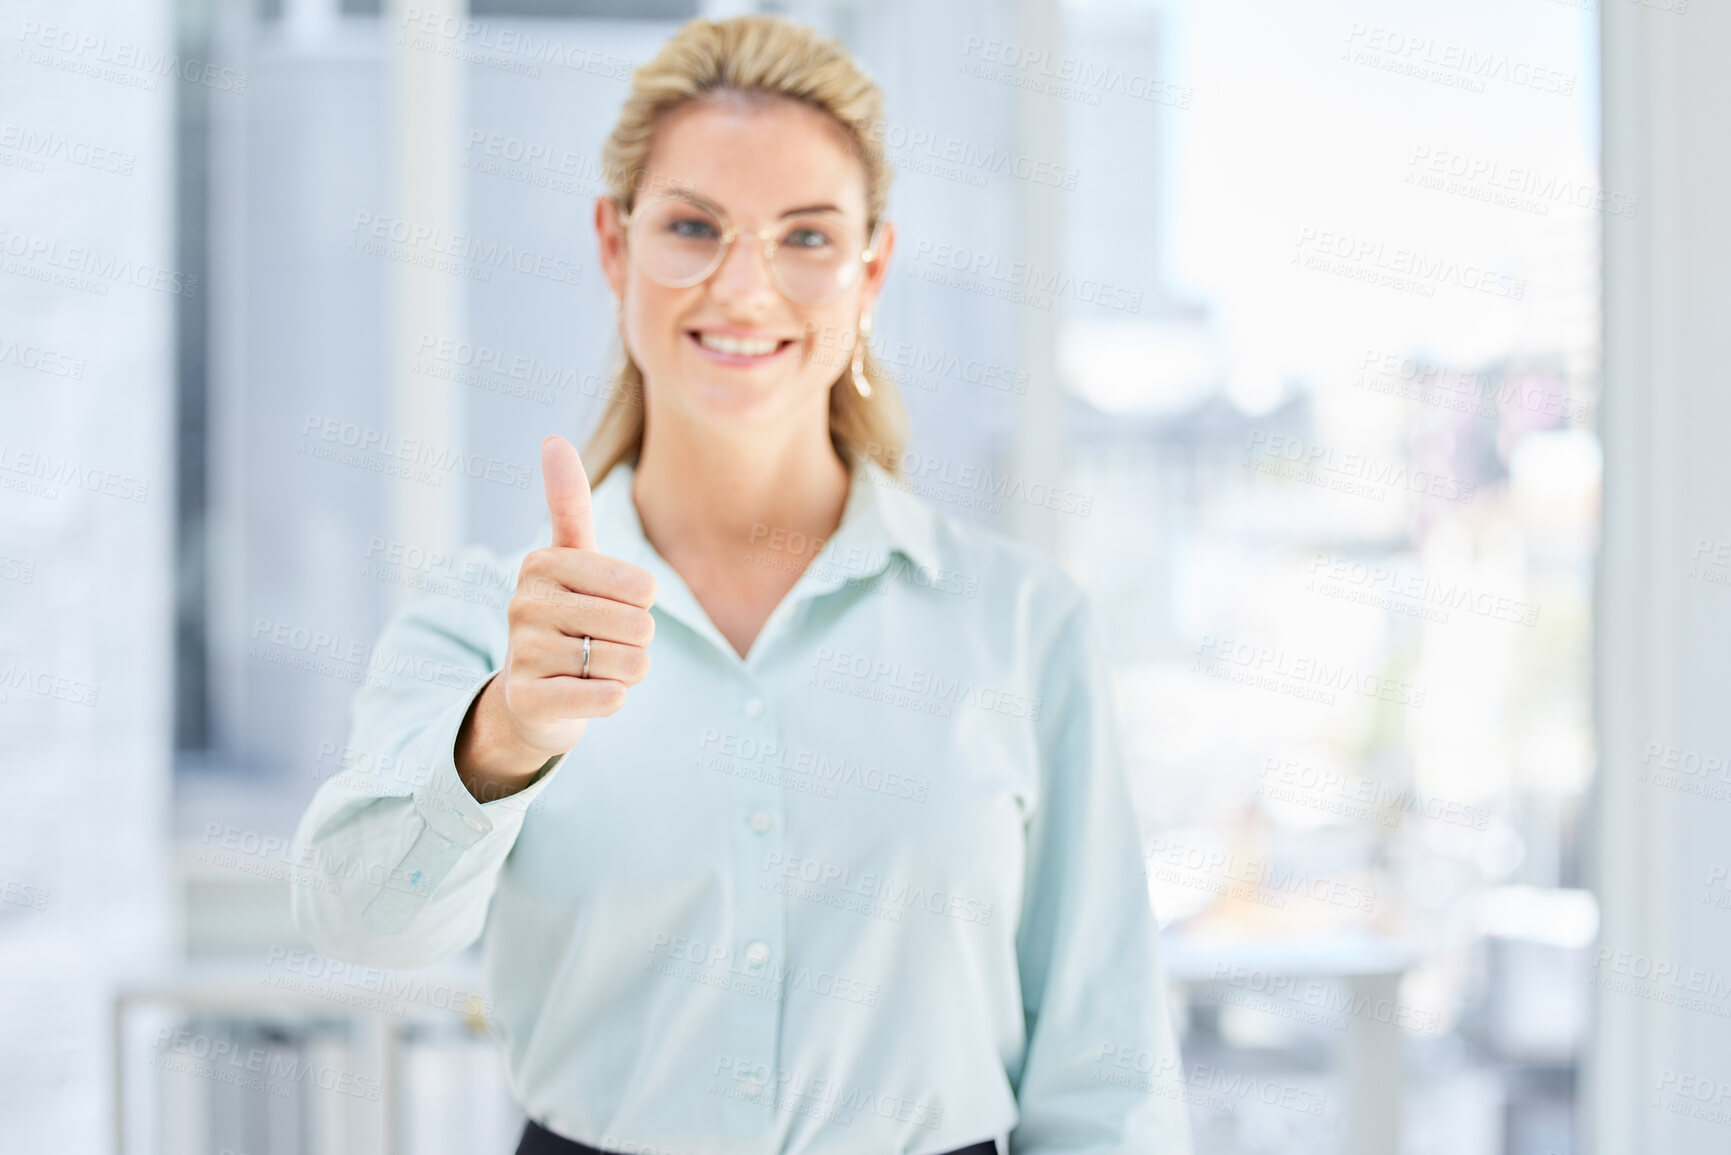 Buy stock photo Leadership, success or business woman with thumbs up after review, financial report or sales goals in office building. Smile, hand or portrait of a happy employee with growth mindset, pride or praise